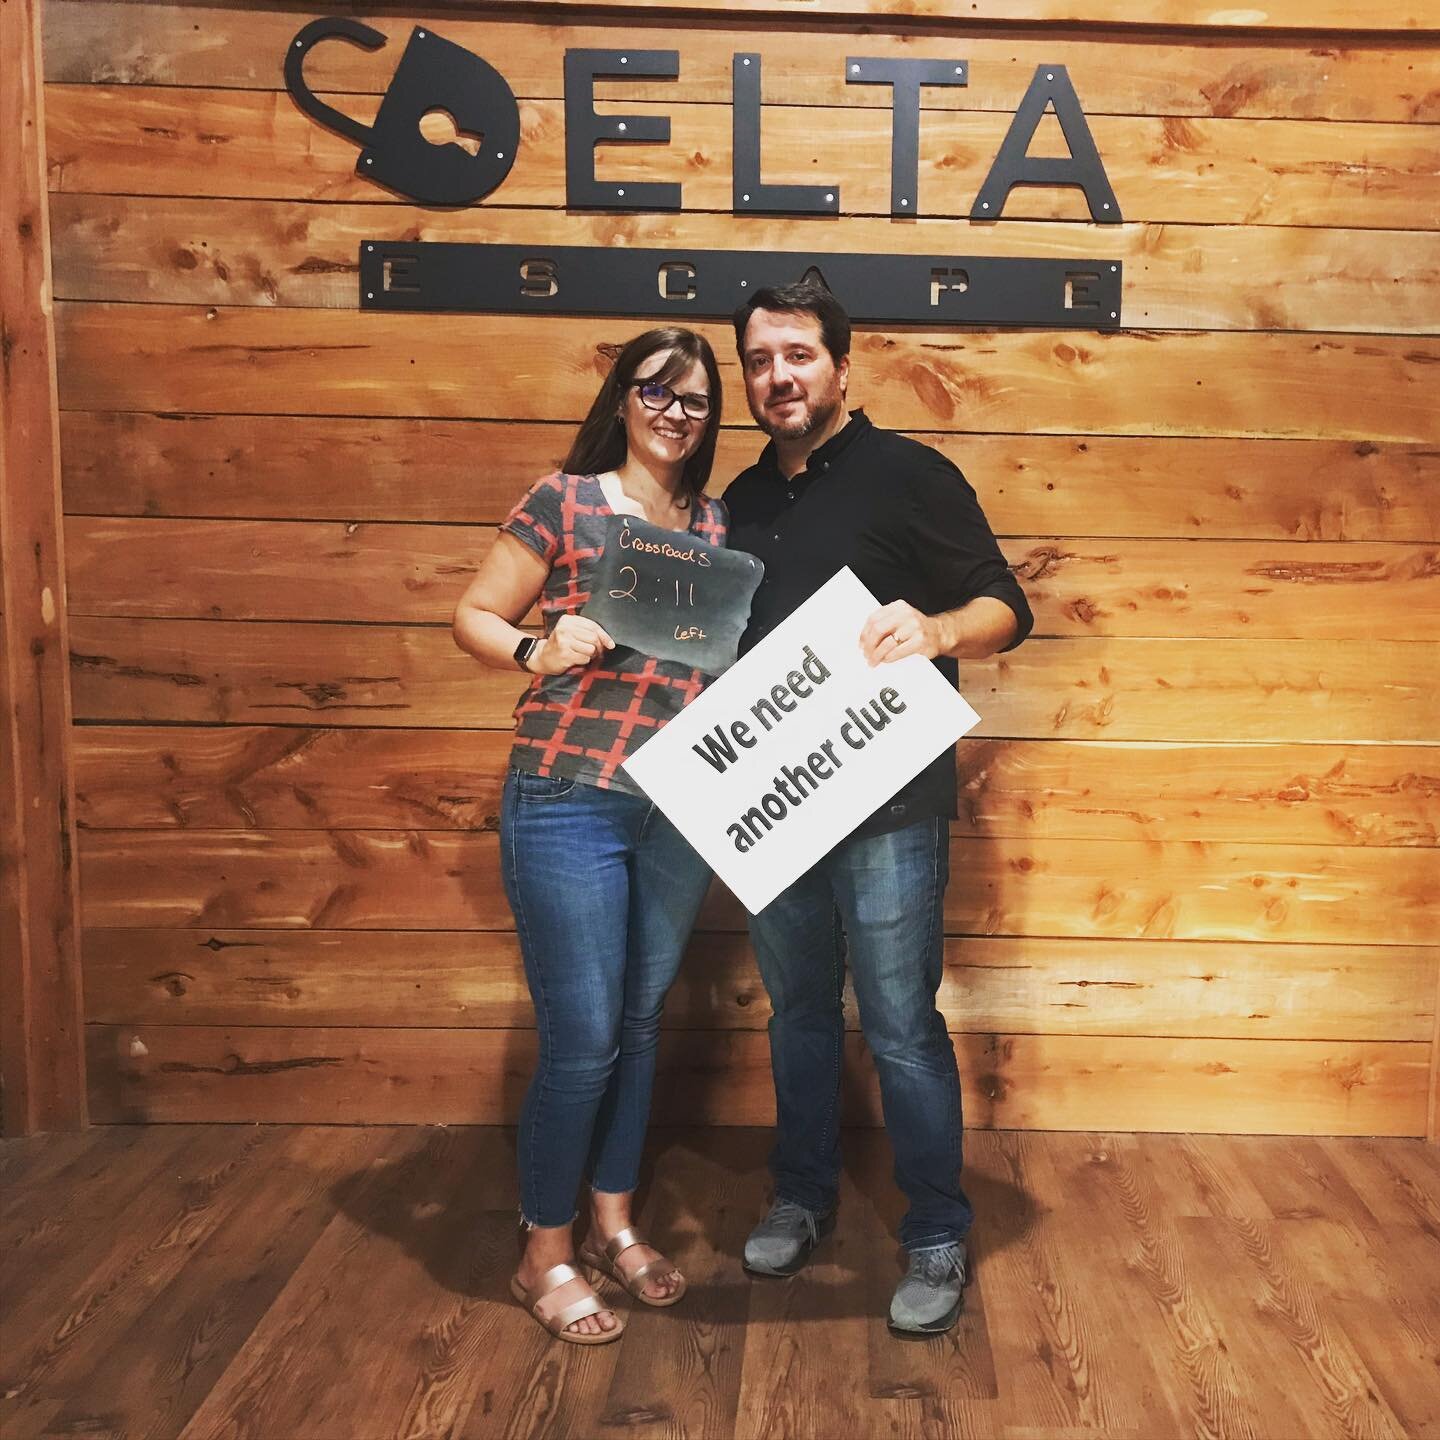 Congrats to this team for escaping Crossroads with 2 minutes and 11 seconds left!

Our Fourth of July special starts tomorrow! Book a room of at least 4 and the 5th is on us!
.⁣
.⁣
.⁣
.⁣
#clevelandms #msdelta #deltaescaperoom #gamenight #game #teambu